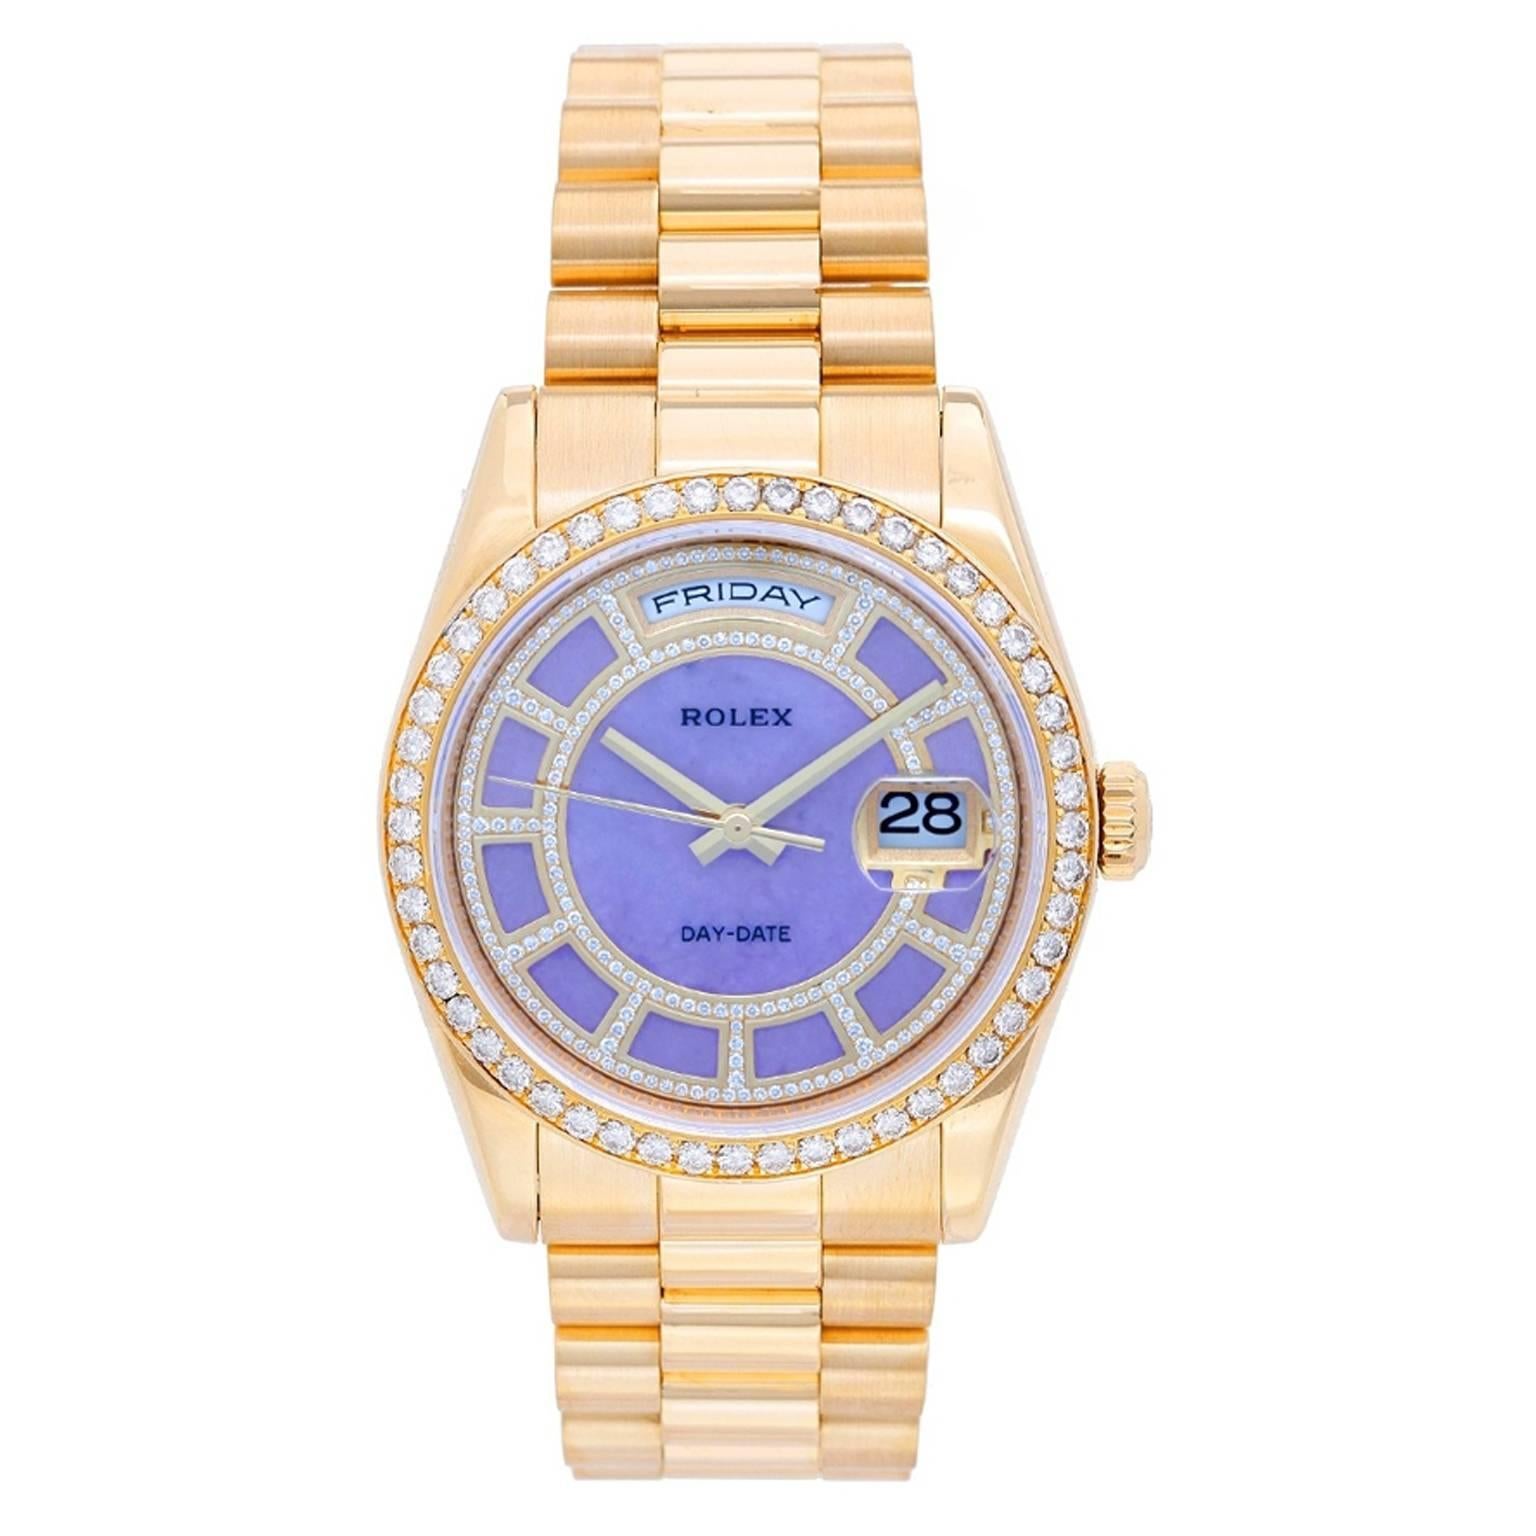 Rolex yellow gold President Day-Date Factory Lilac Stone Diamond Dial Wristwatch